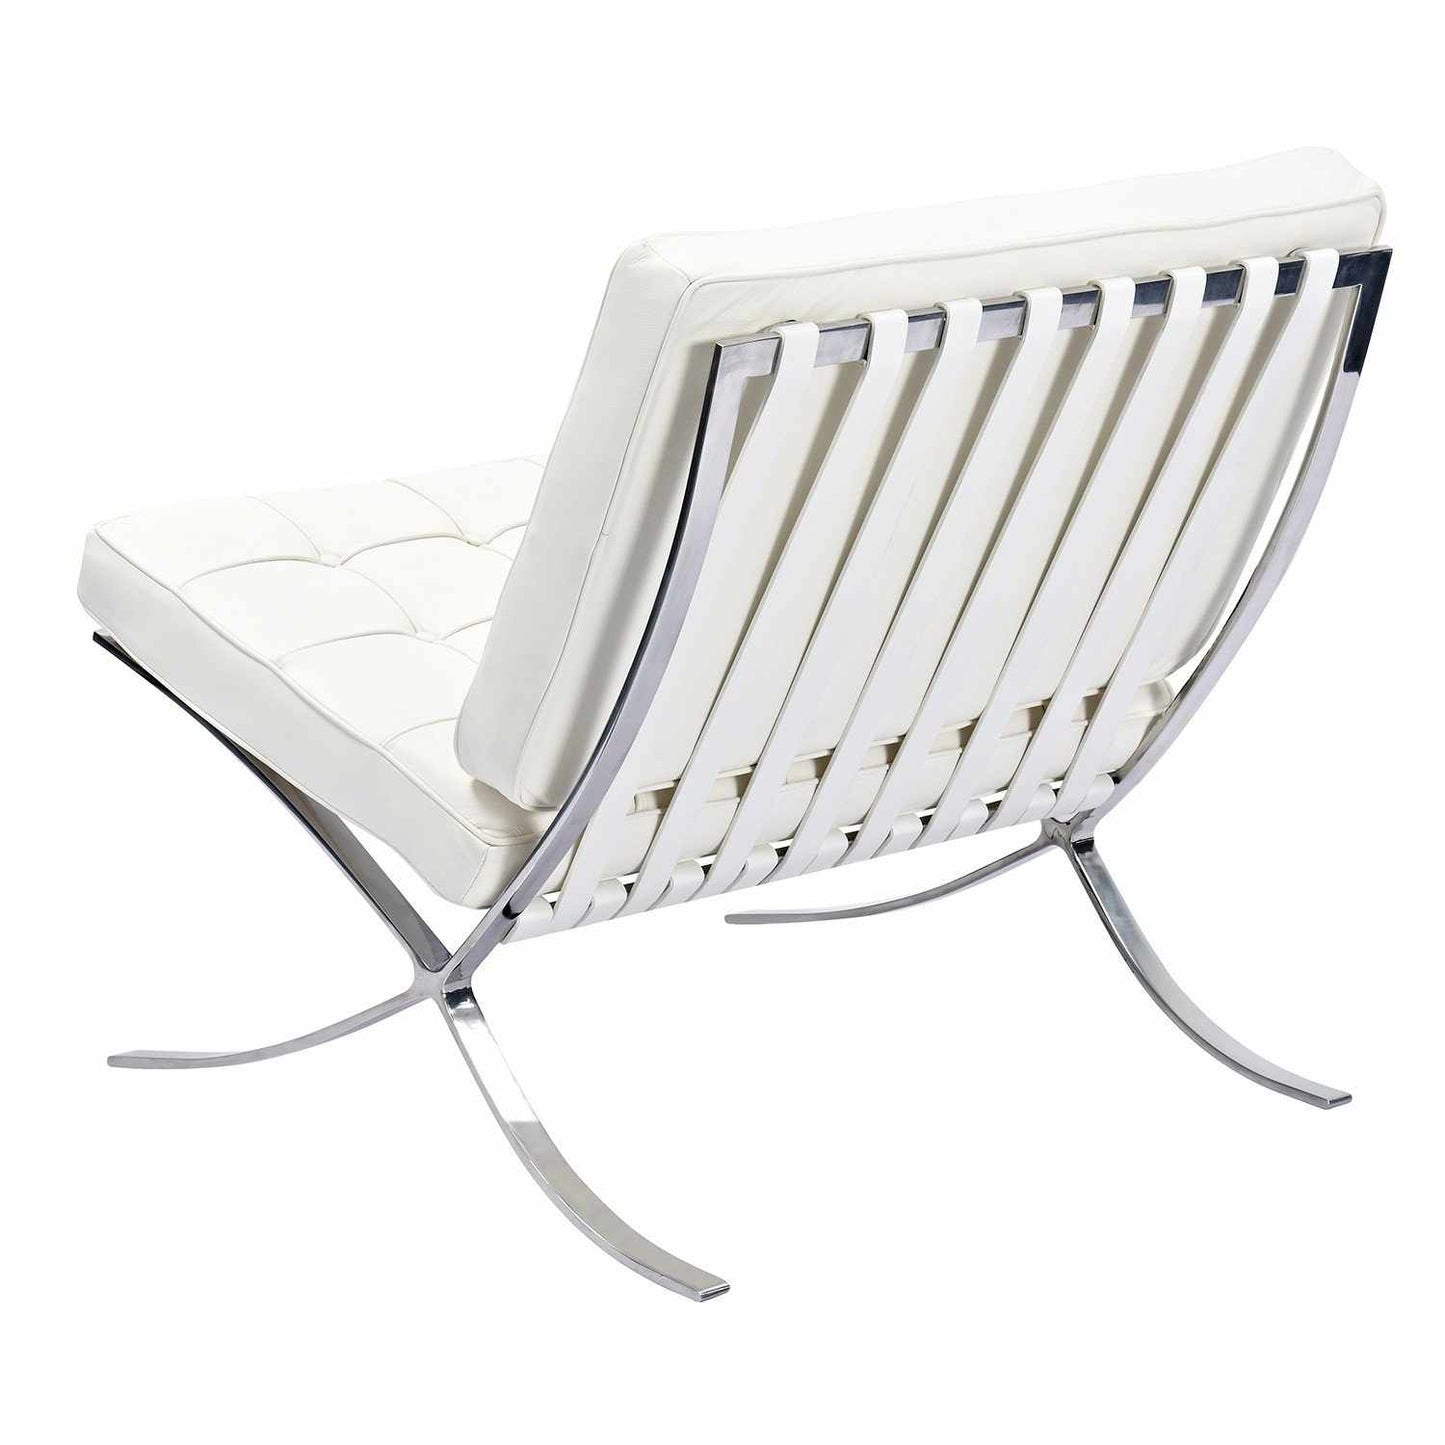 Barcelona Style Chair - living-essentials